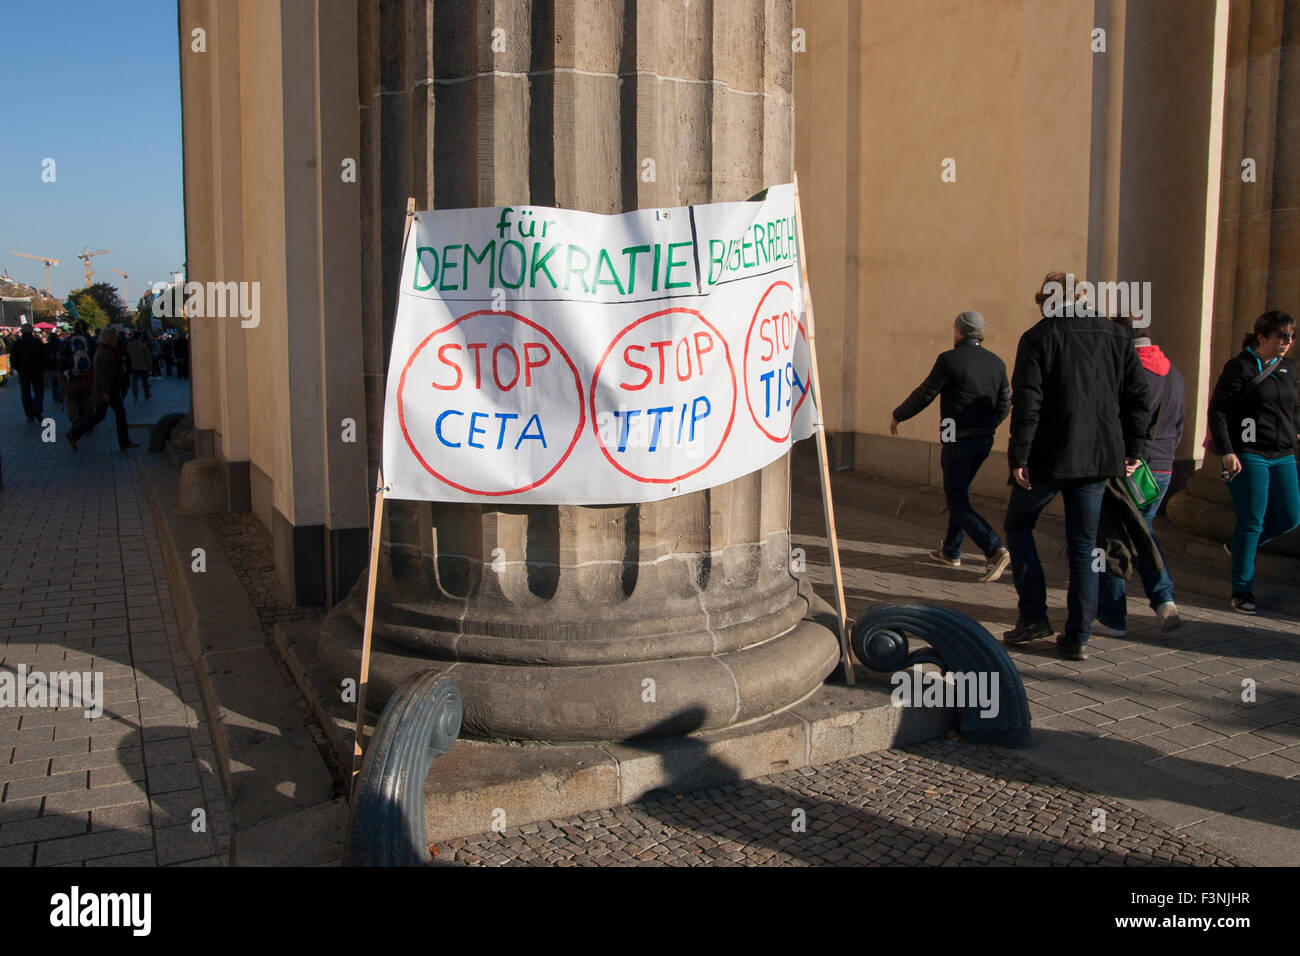 Berlin, Germany. 10th Oct, 2015. Demonstration against TTIP and CETA in Berlin, Germany. Stock Photo